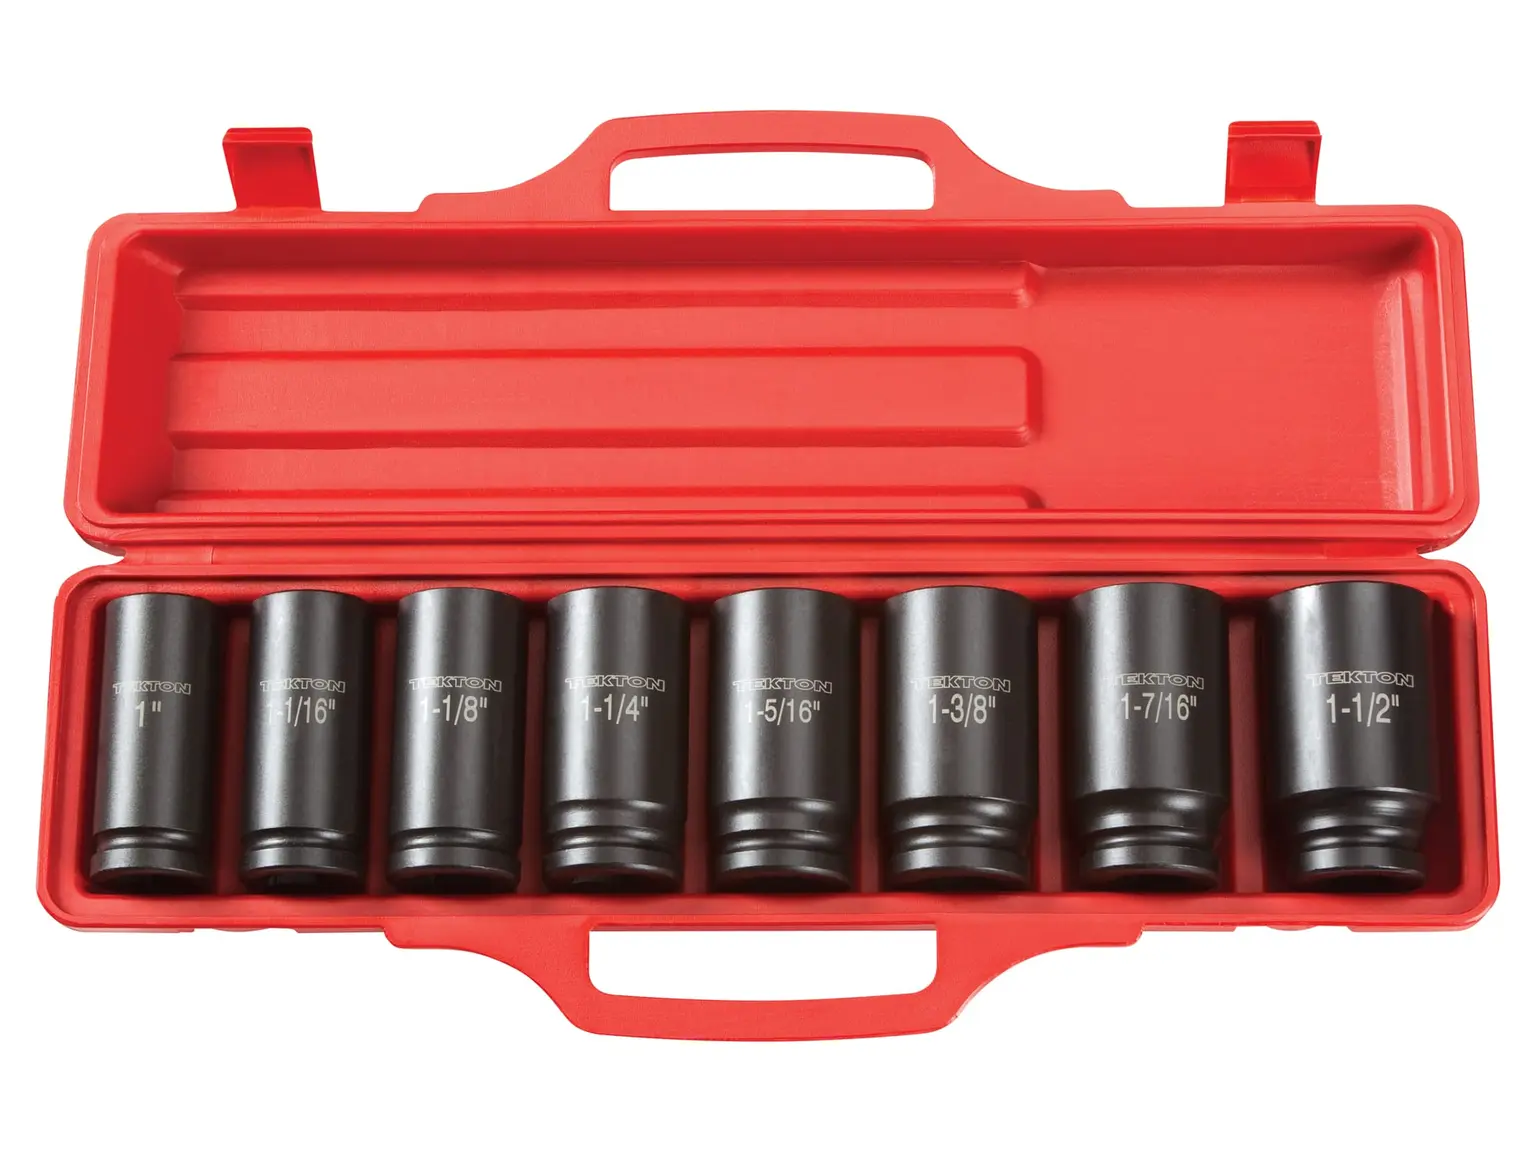 Tekton 3/4 Inch Drive Deep 6 Point Impact Socket Set (8 Piece) from Columbia Safety